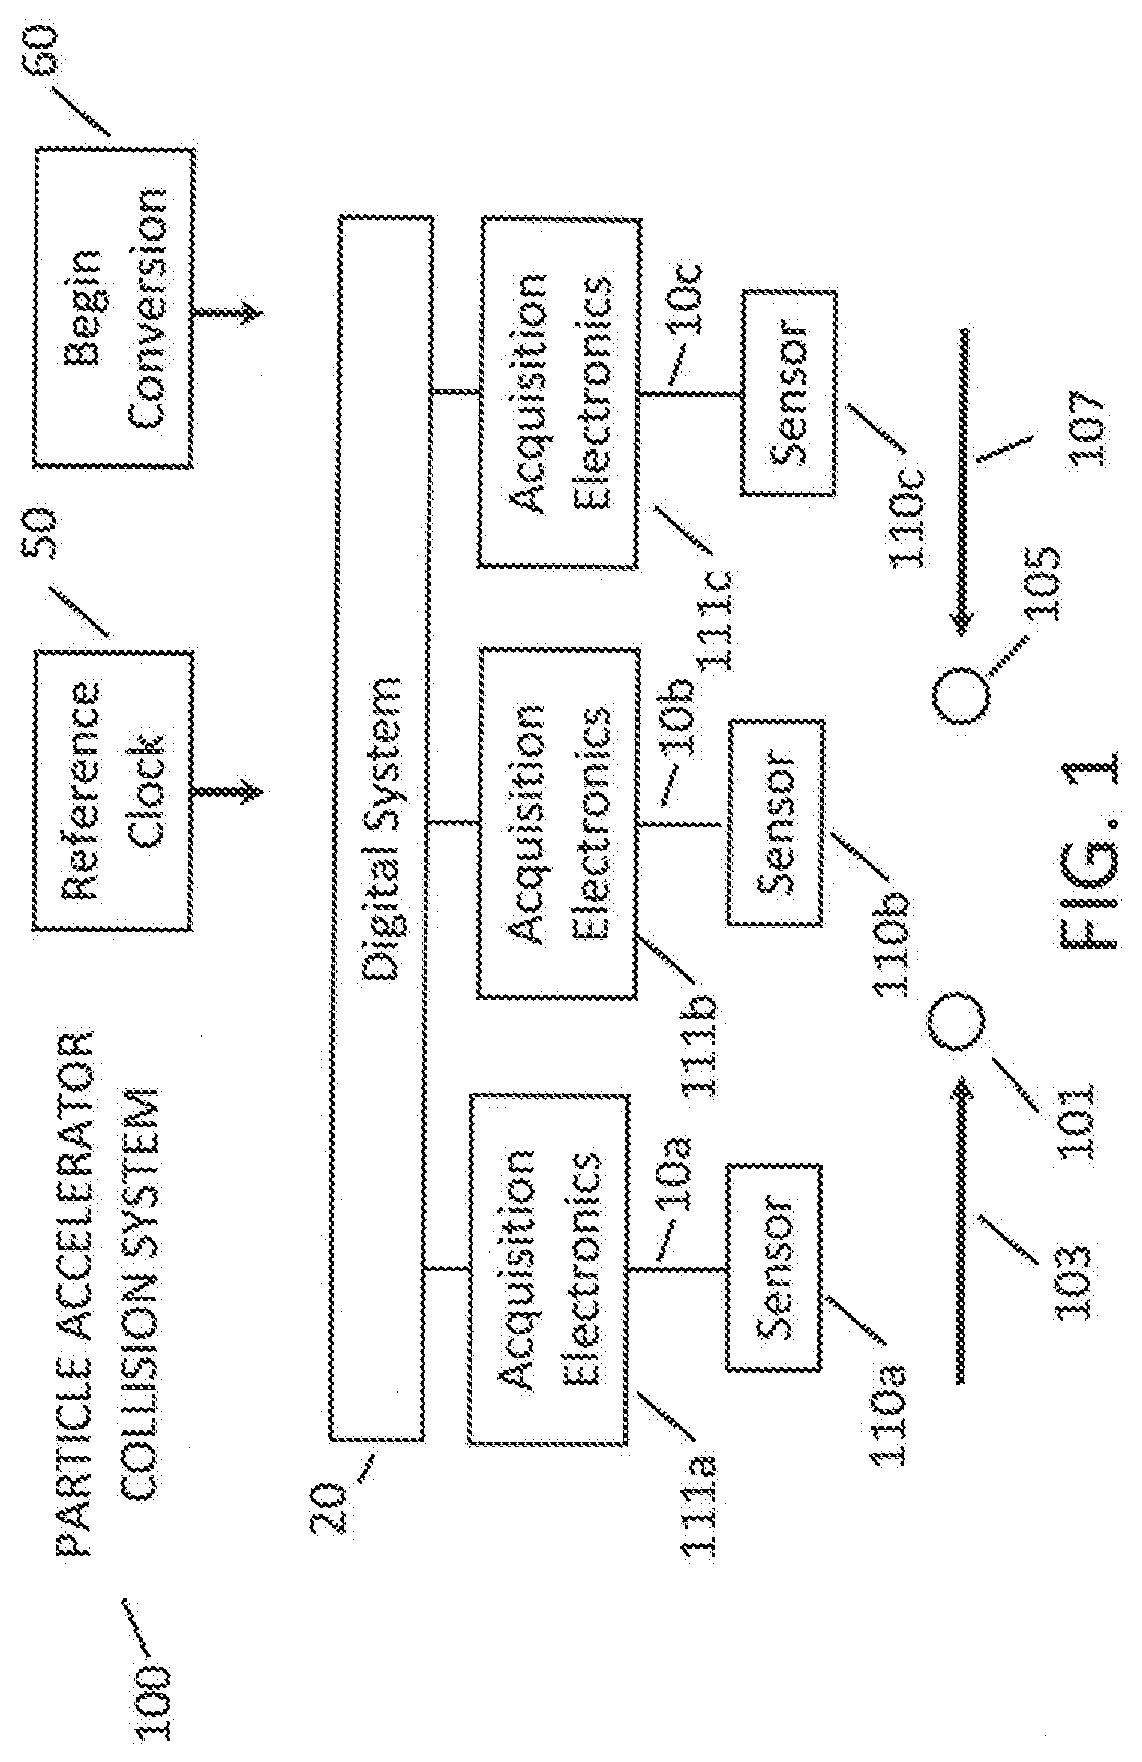 System and method for high-sample rate transient data acquisition with pre-conversion activity detection